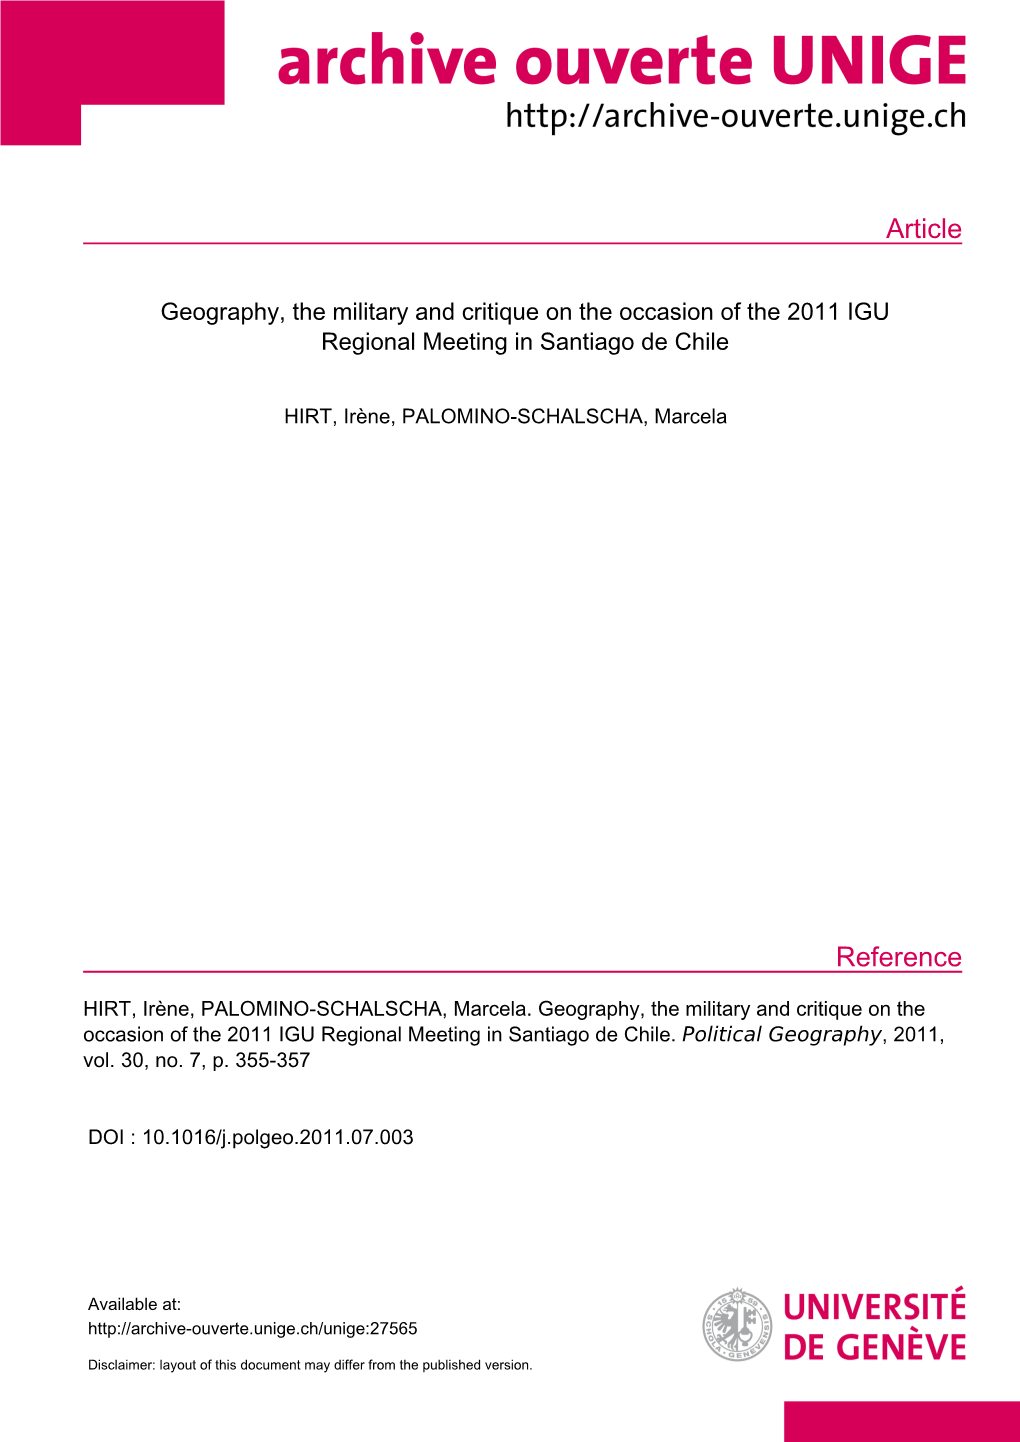 Geography, the Military and Critique on the Occasion of the 2011 IGU Regional Meeting in Santiago De Chile